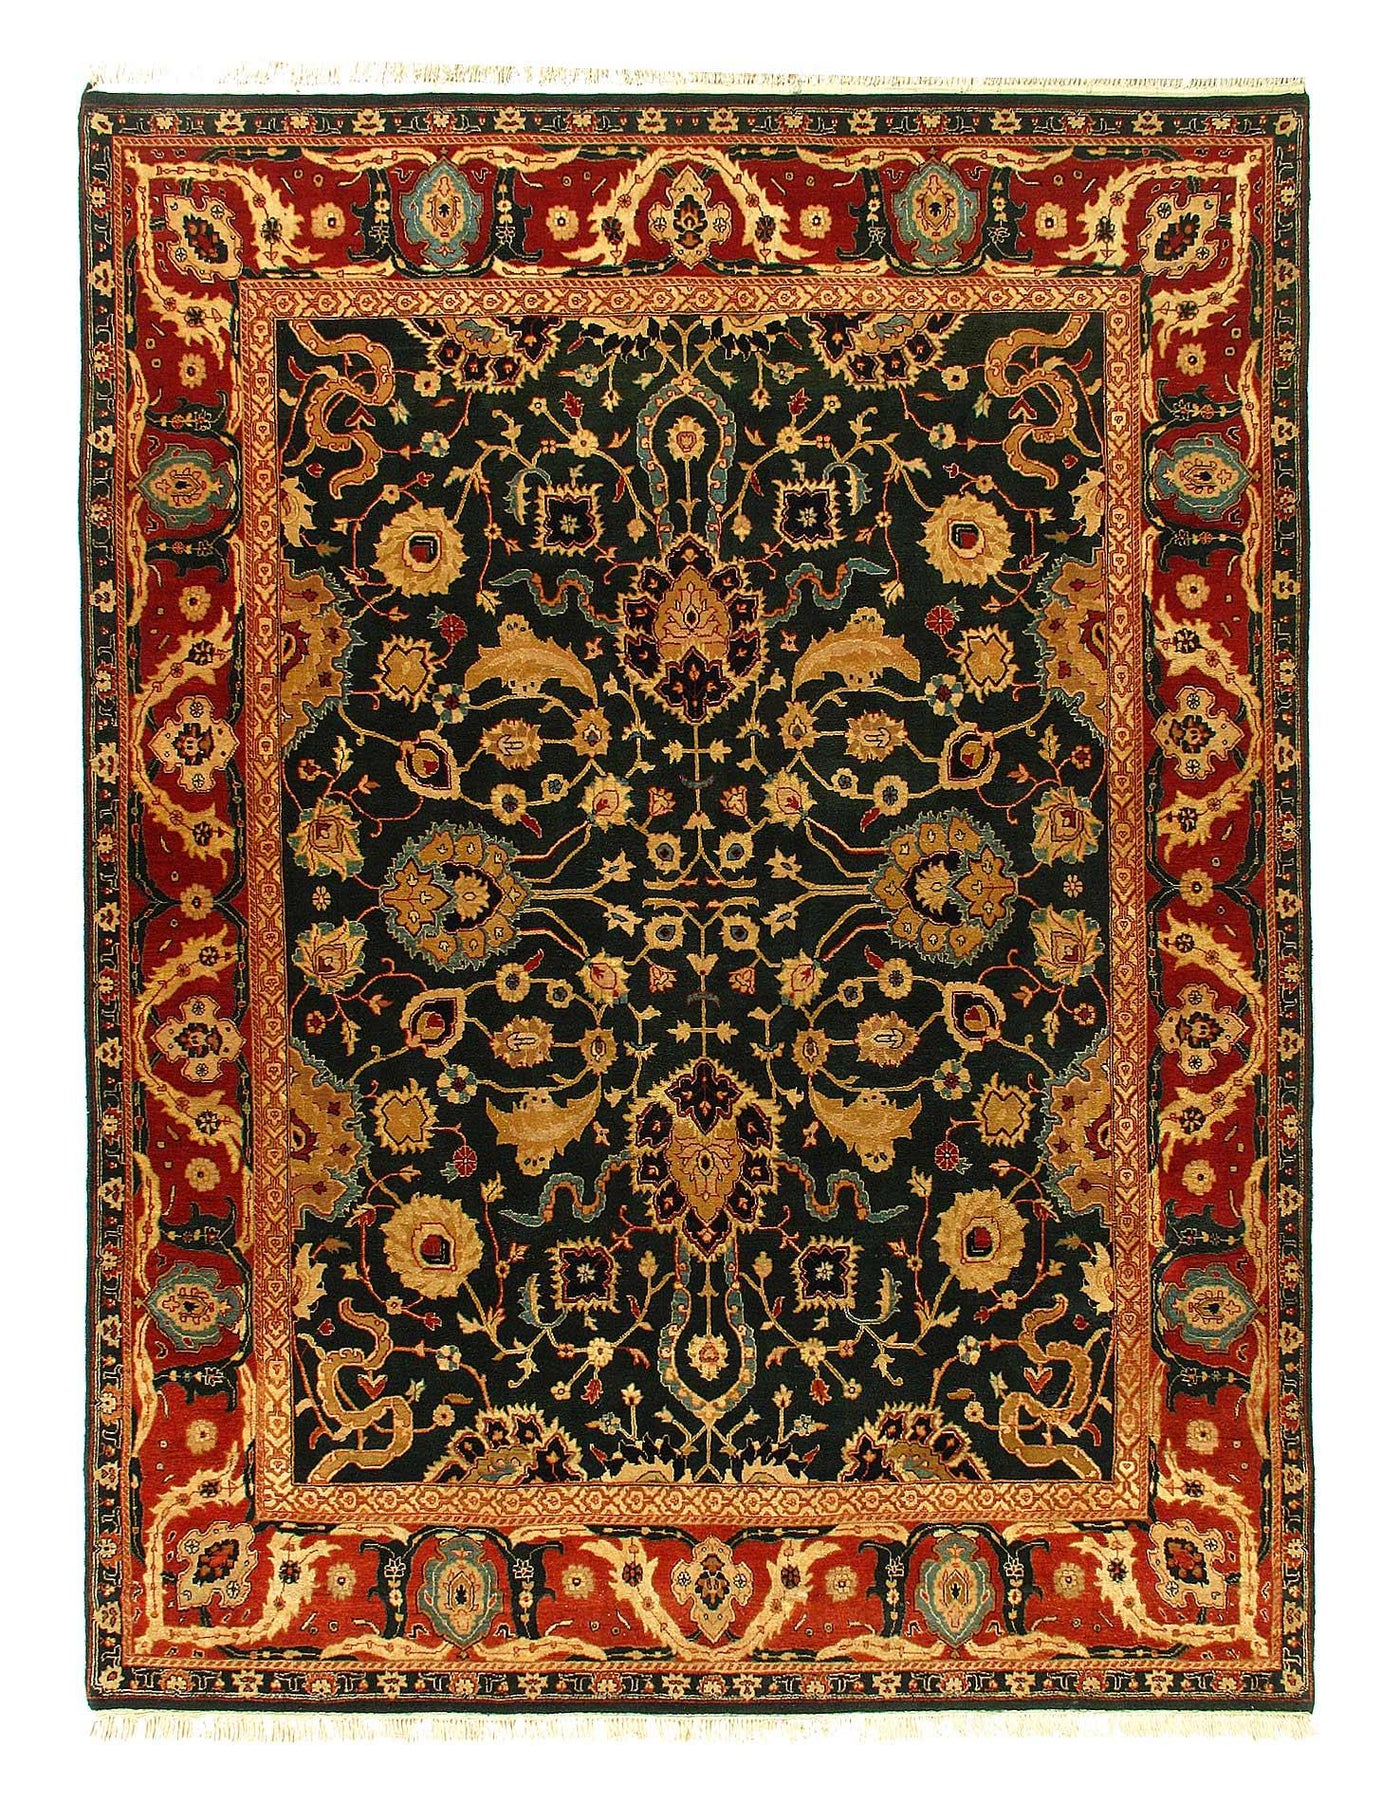 Canvello Traditional Fine Hand Knotted Agra rug - 8' X 10'9''